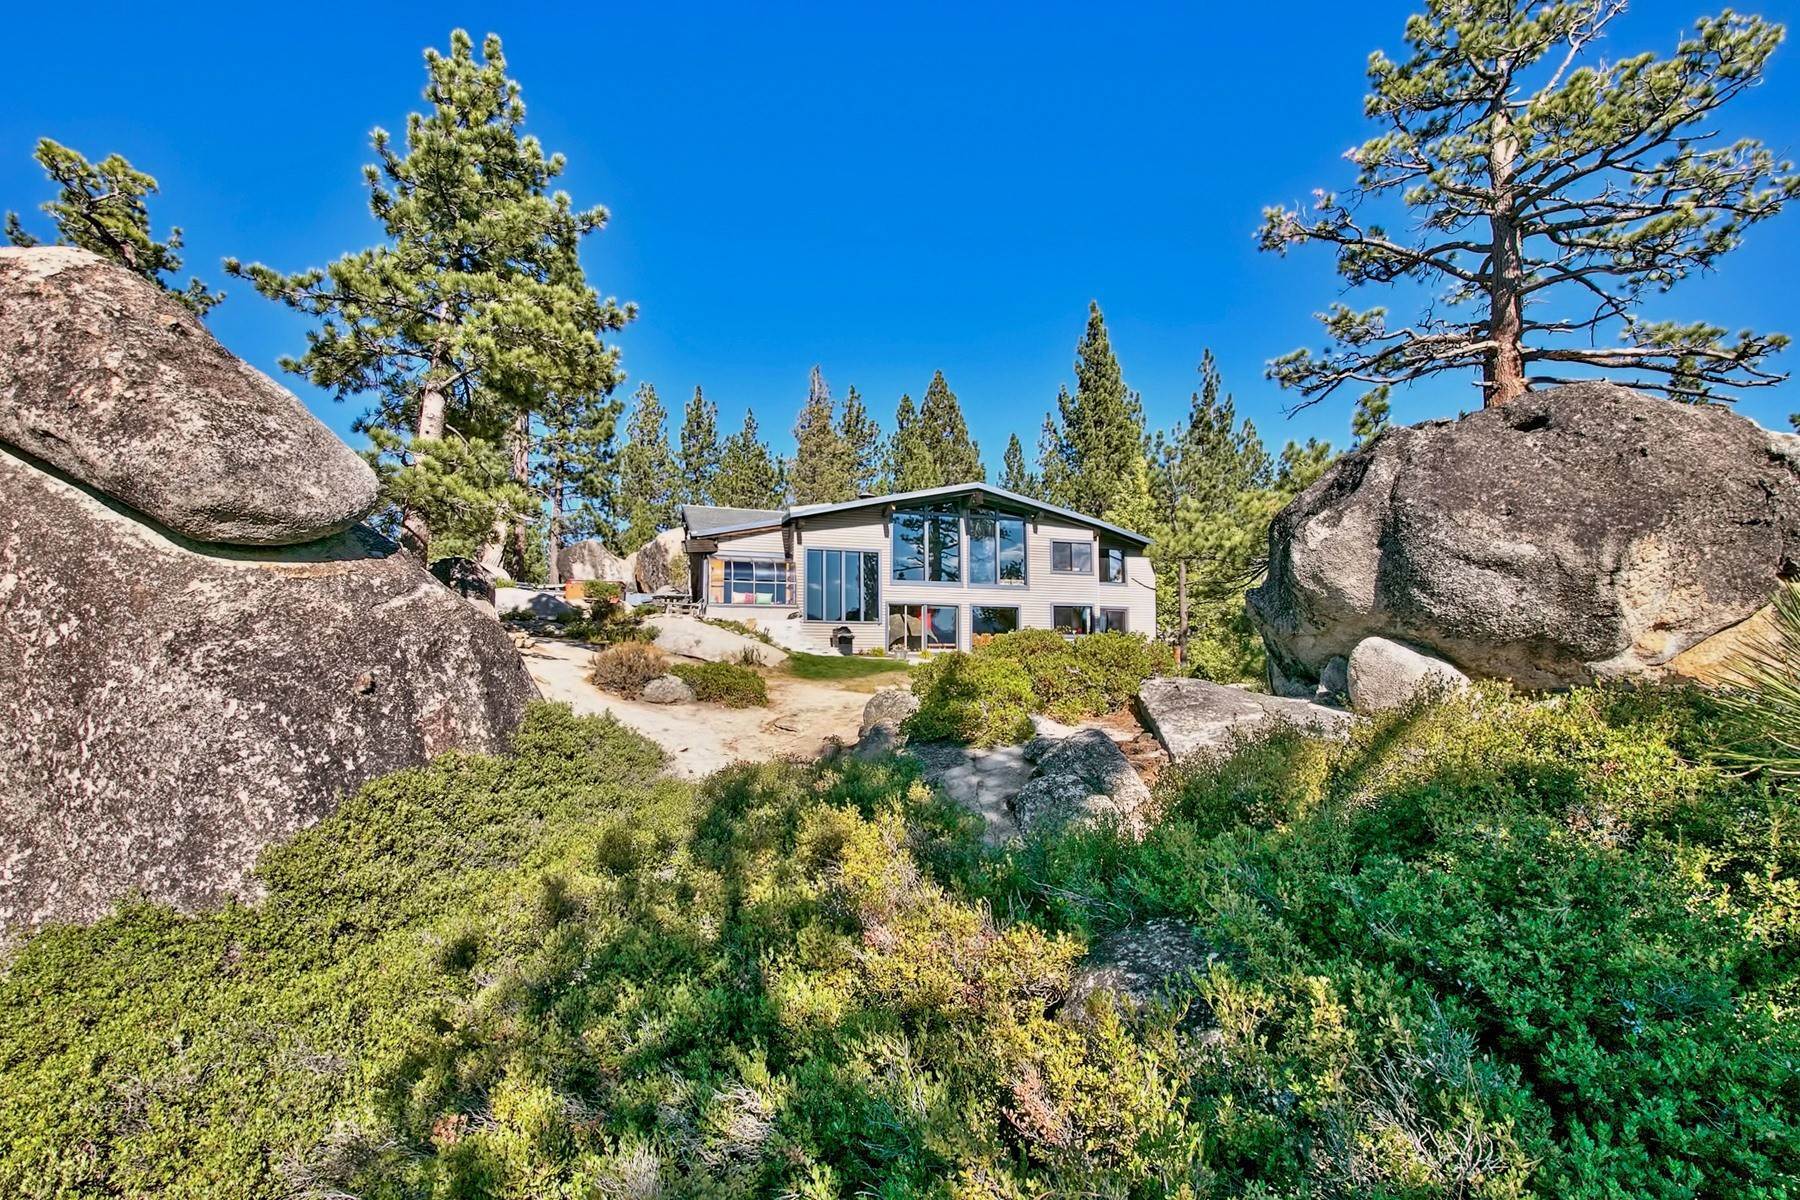 Single Family Homes for Active at Tahoe Stonehenge 1082 Mountain Canary Dr South Lake Tahoe, California 96150 United States